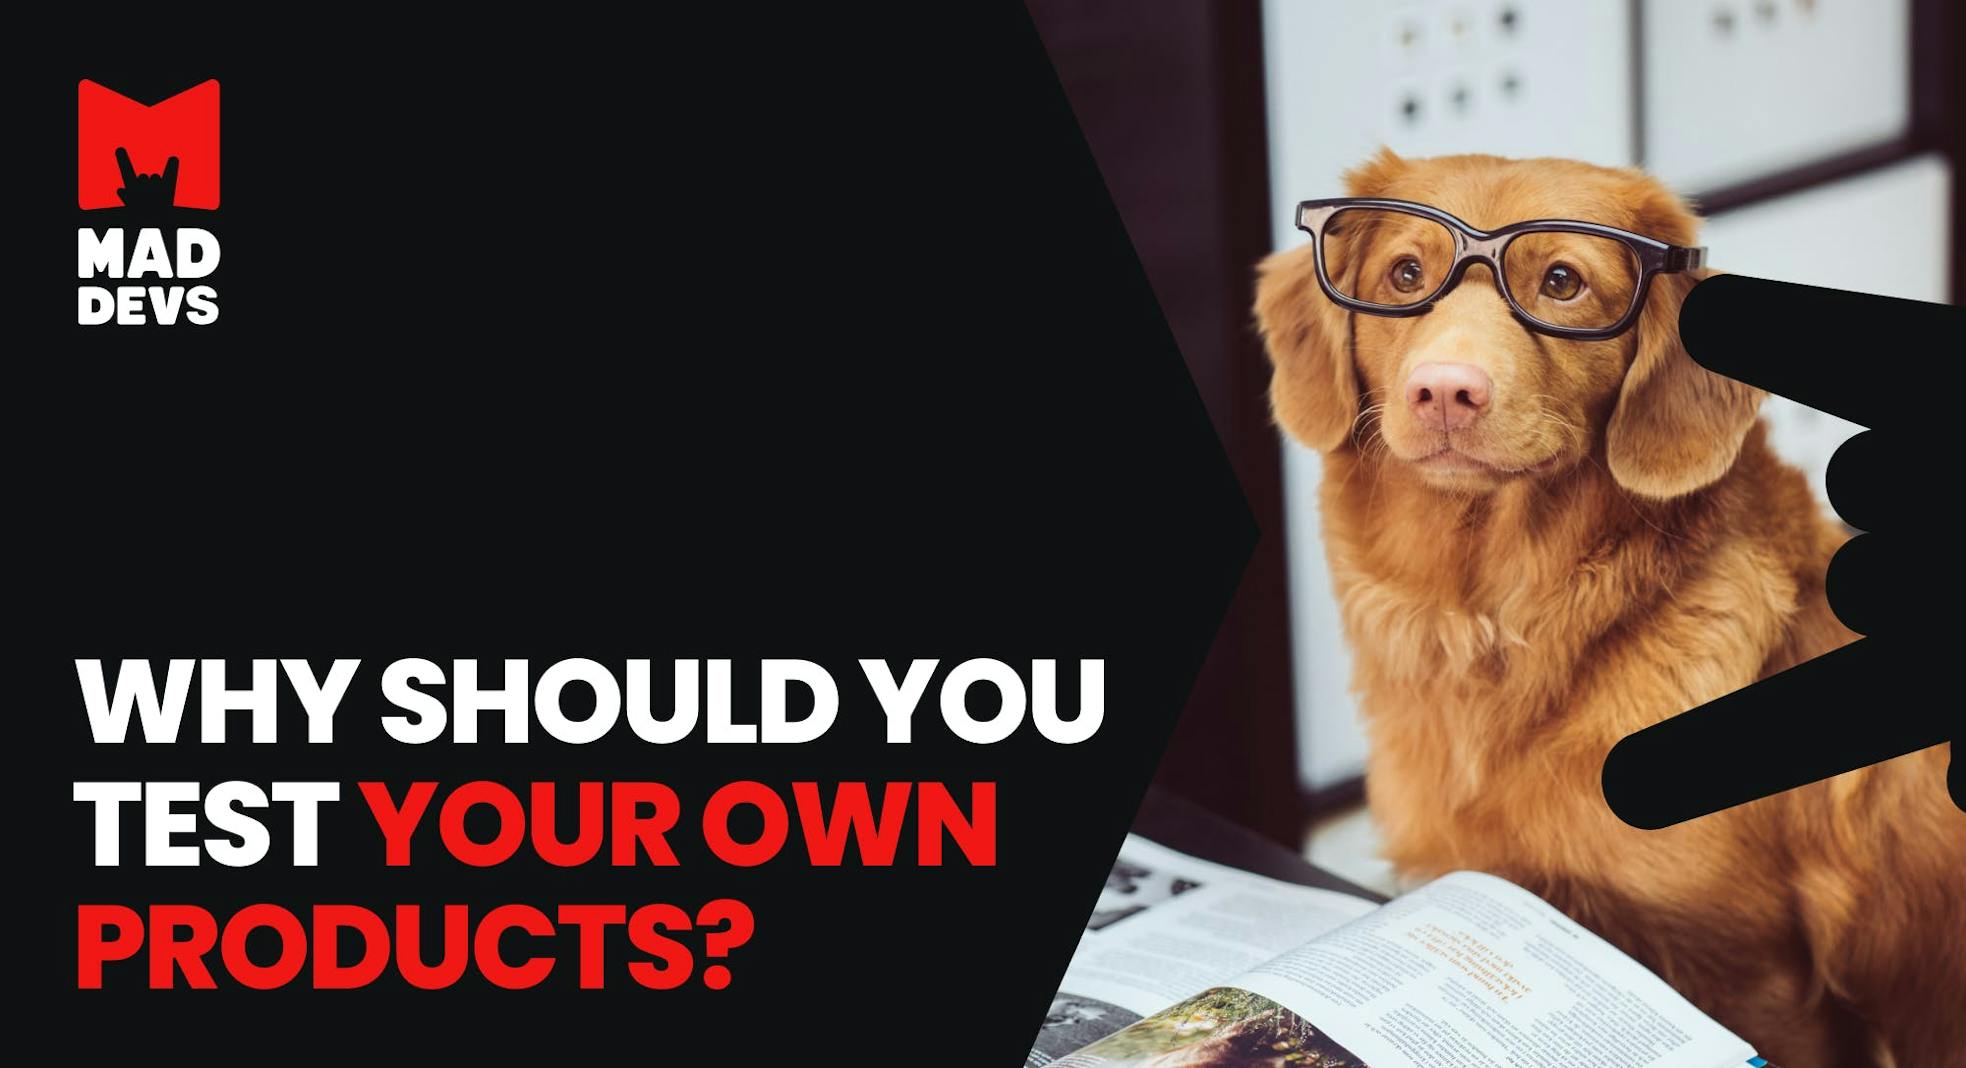 Dogfooding: Why Should You Test Your Own Products?